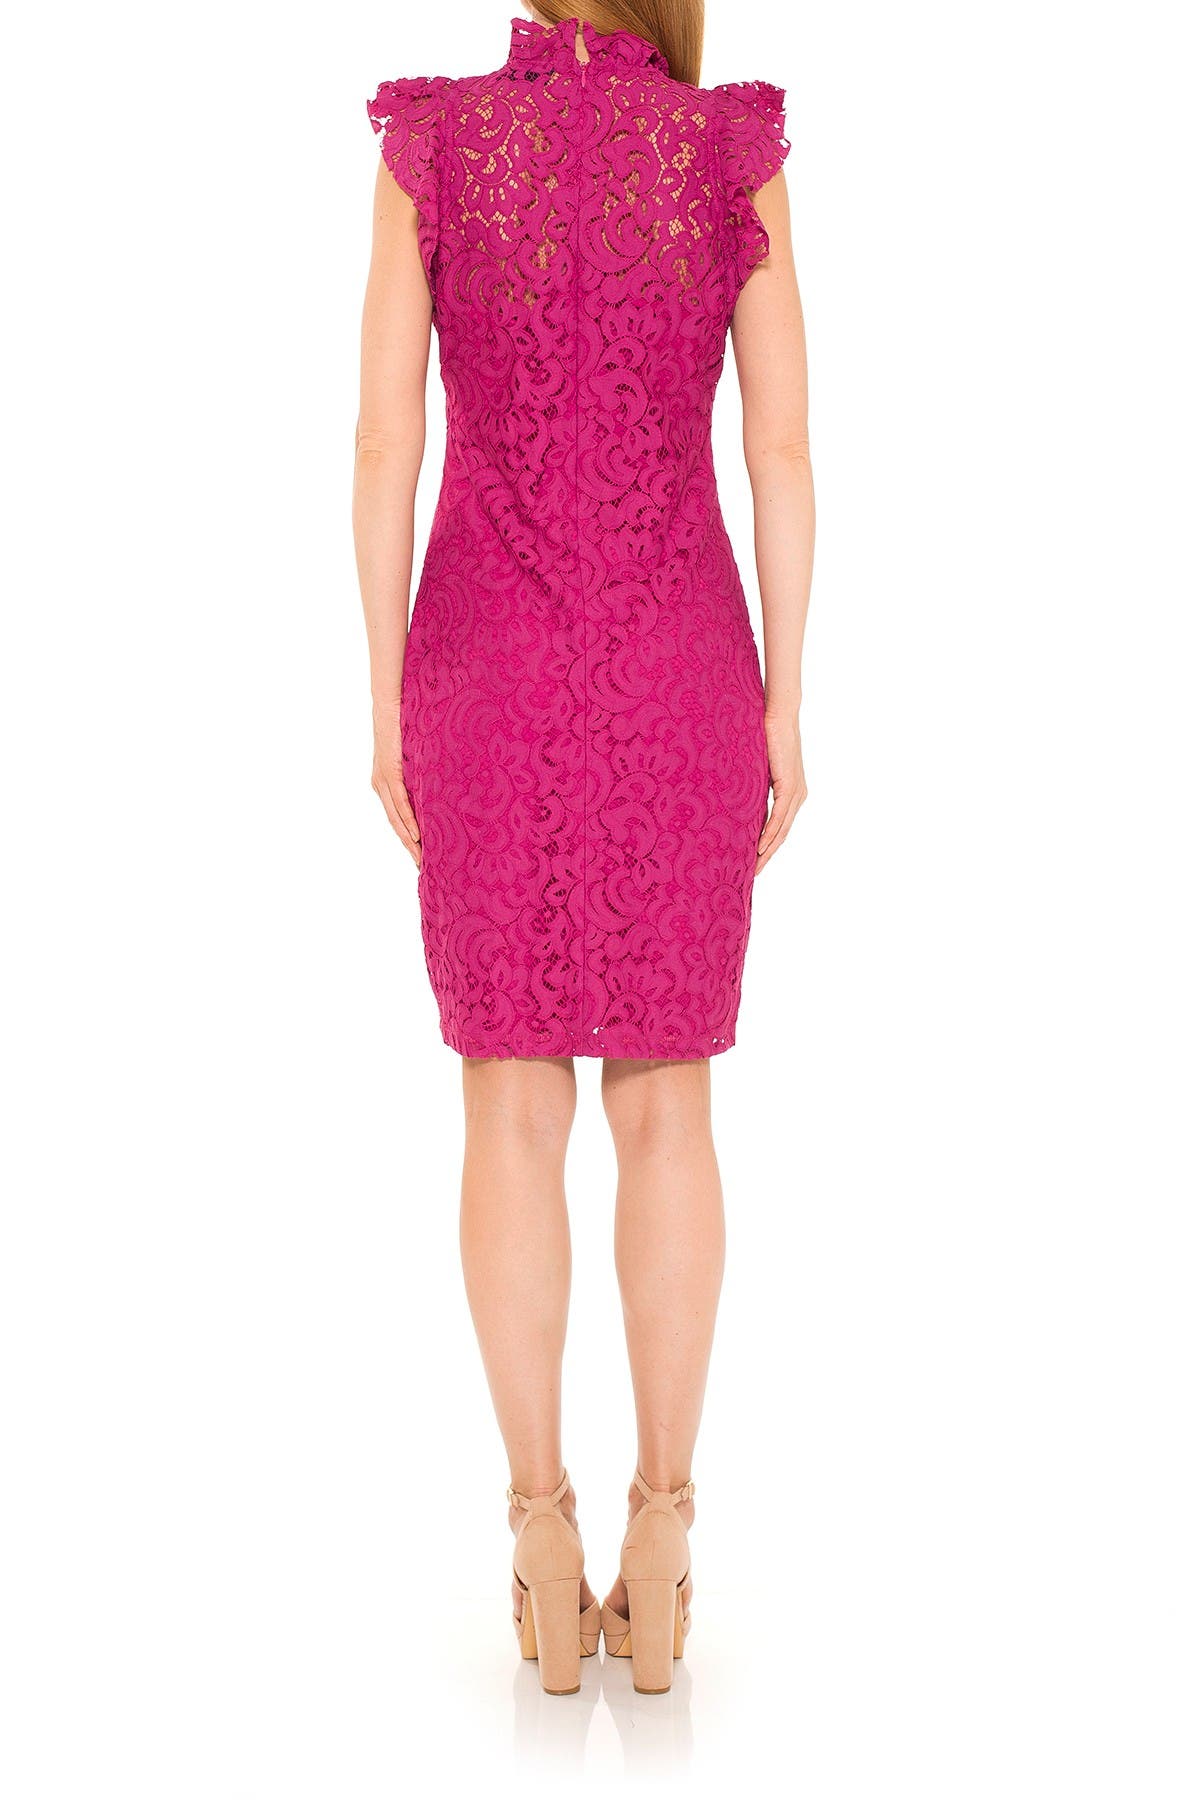 Alexia Admor Kendall Lace Cap Sleeve Sheath Dress In Pink Overflow2